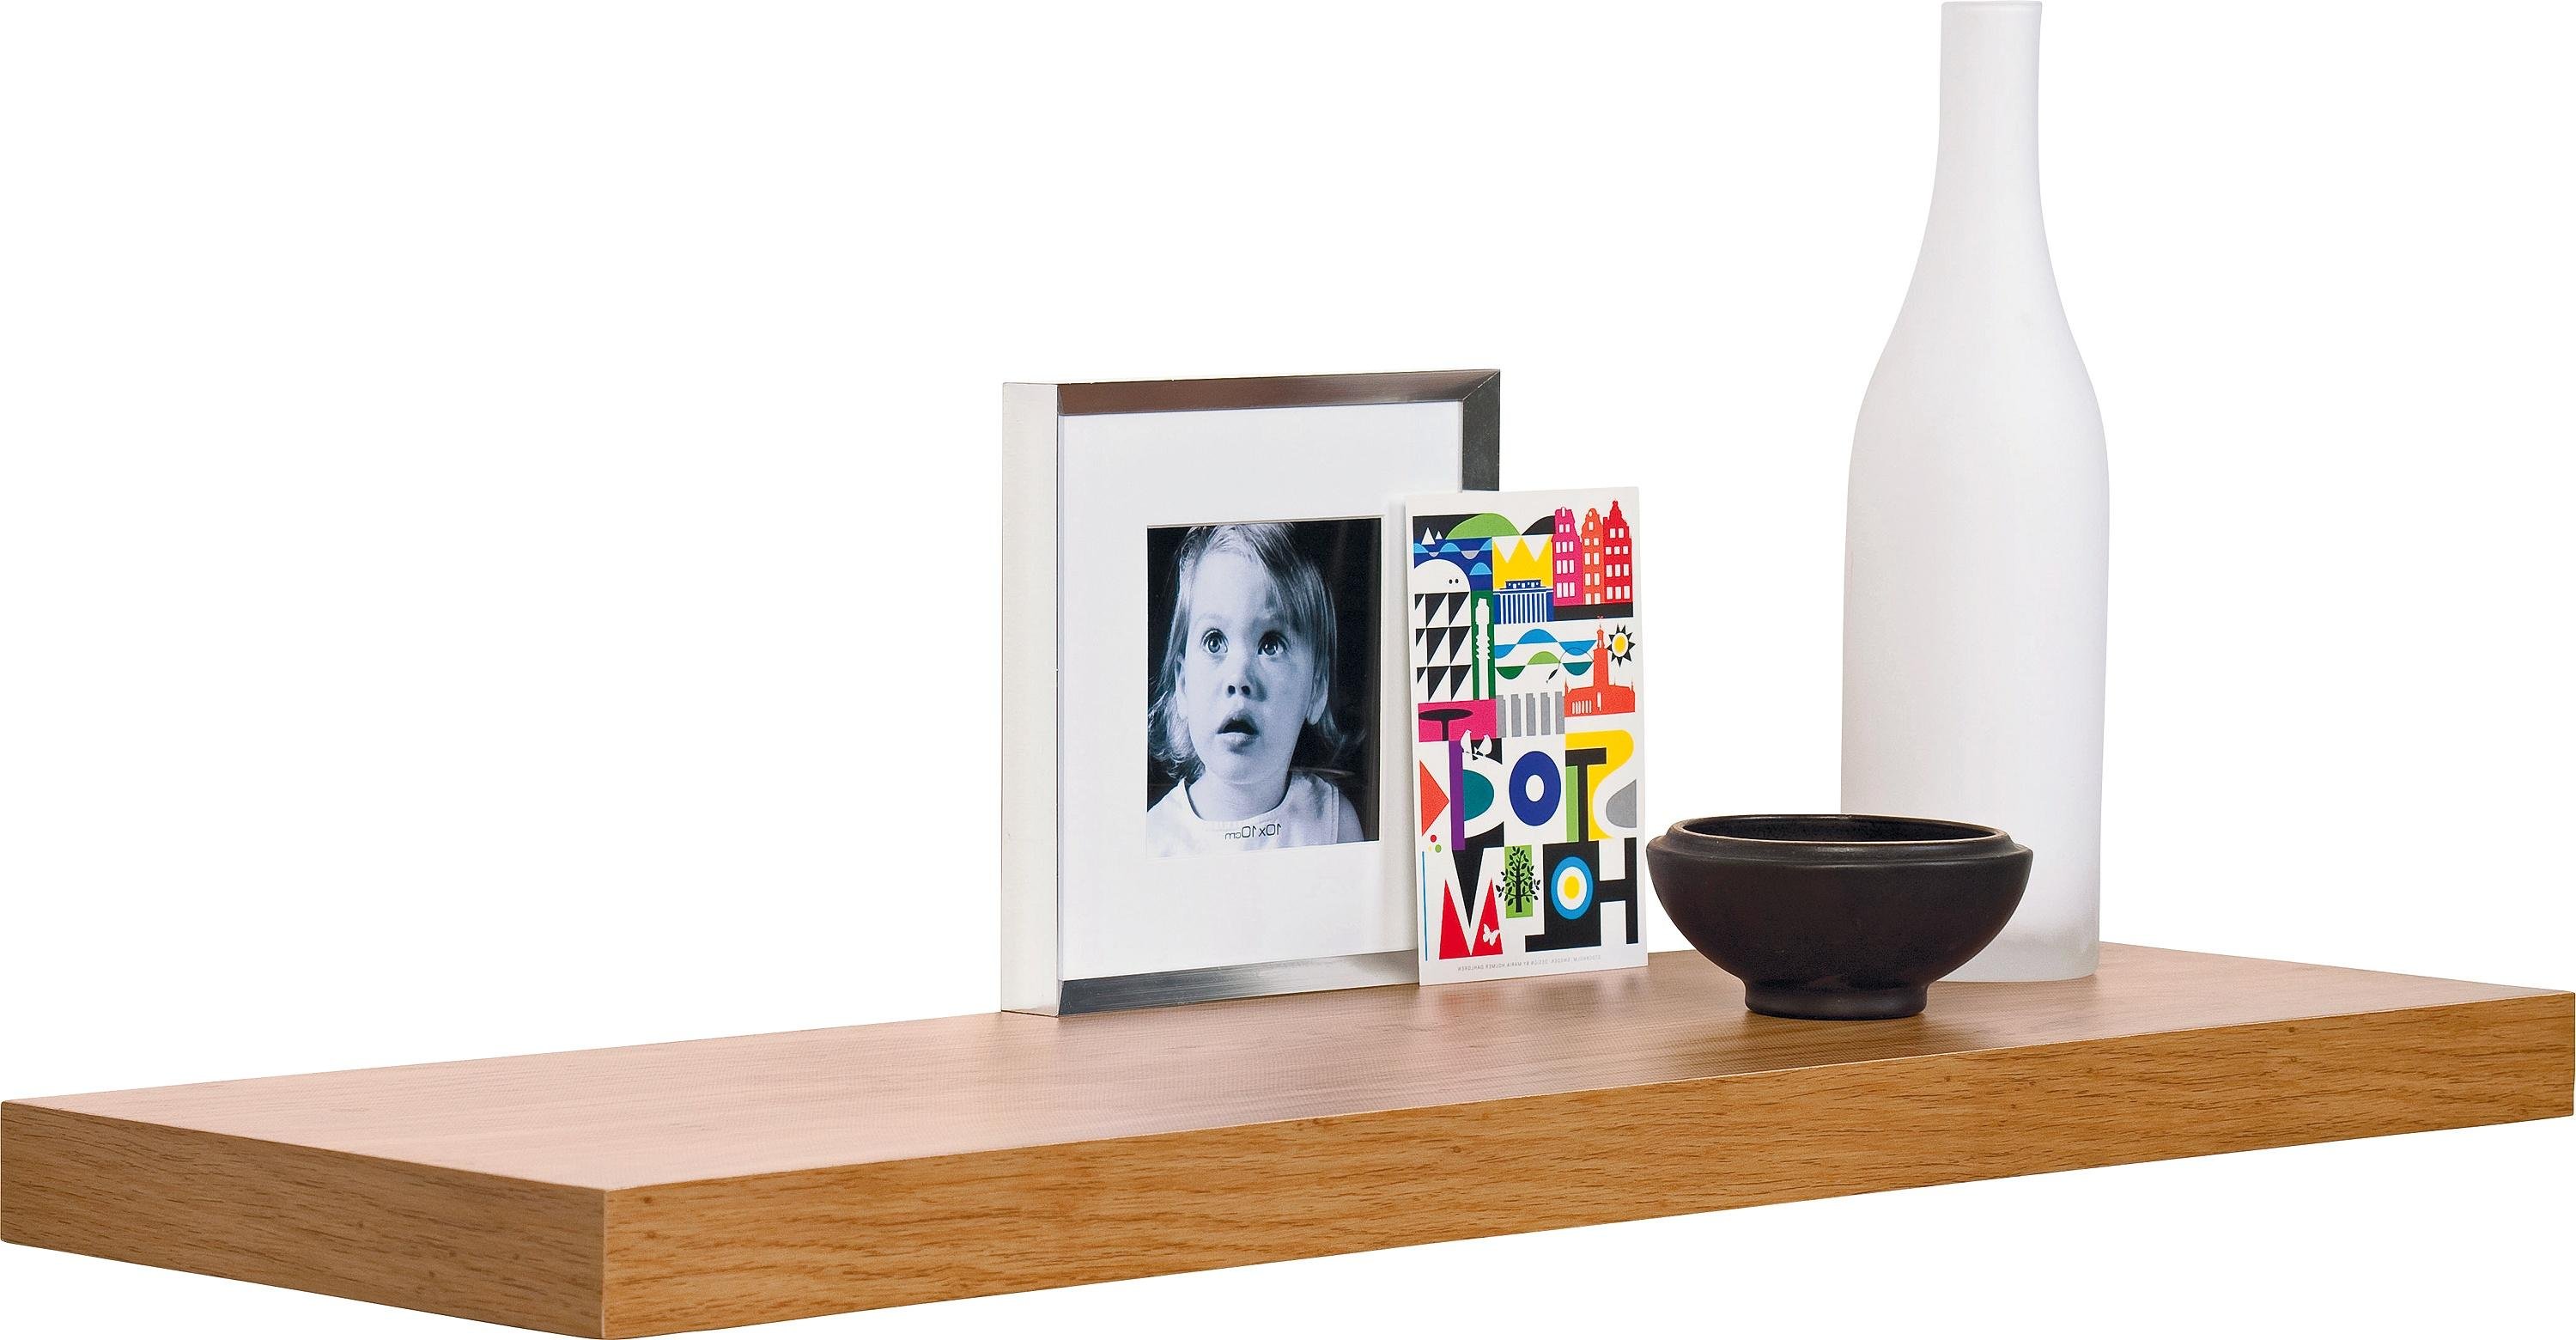 Chunky Floating Shelf in Wood or High Gloss finish.Choice of 60cm or 90cm width.